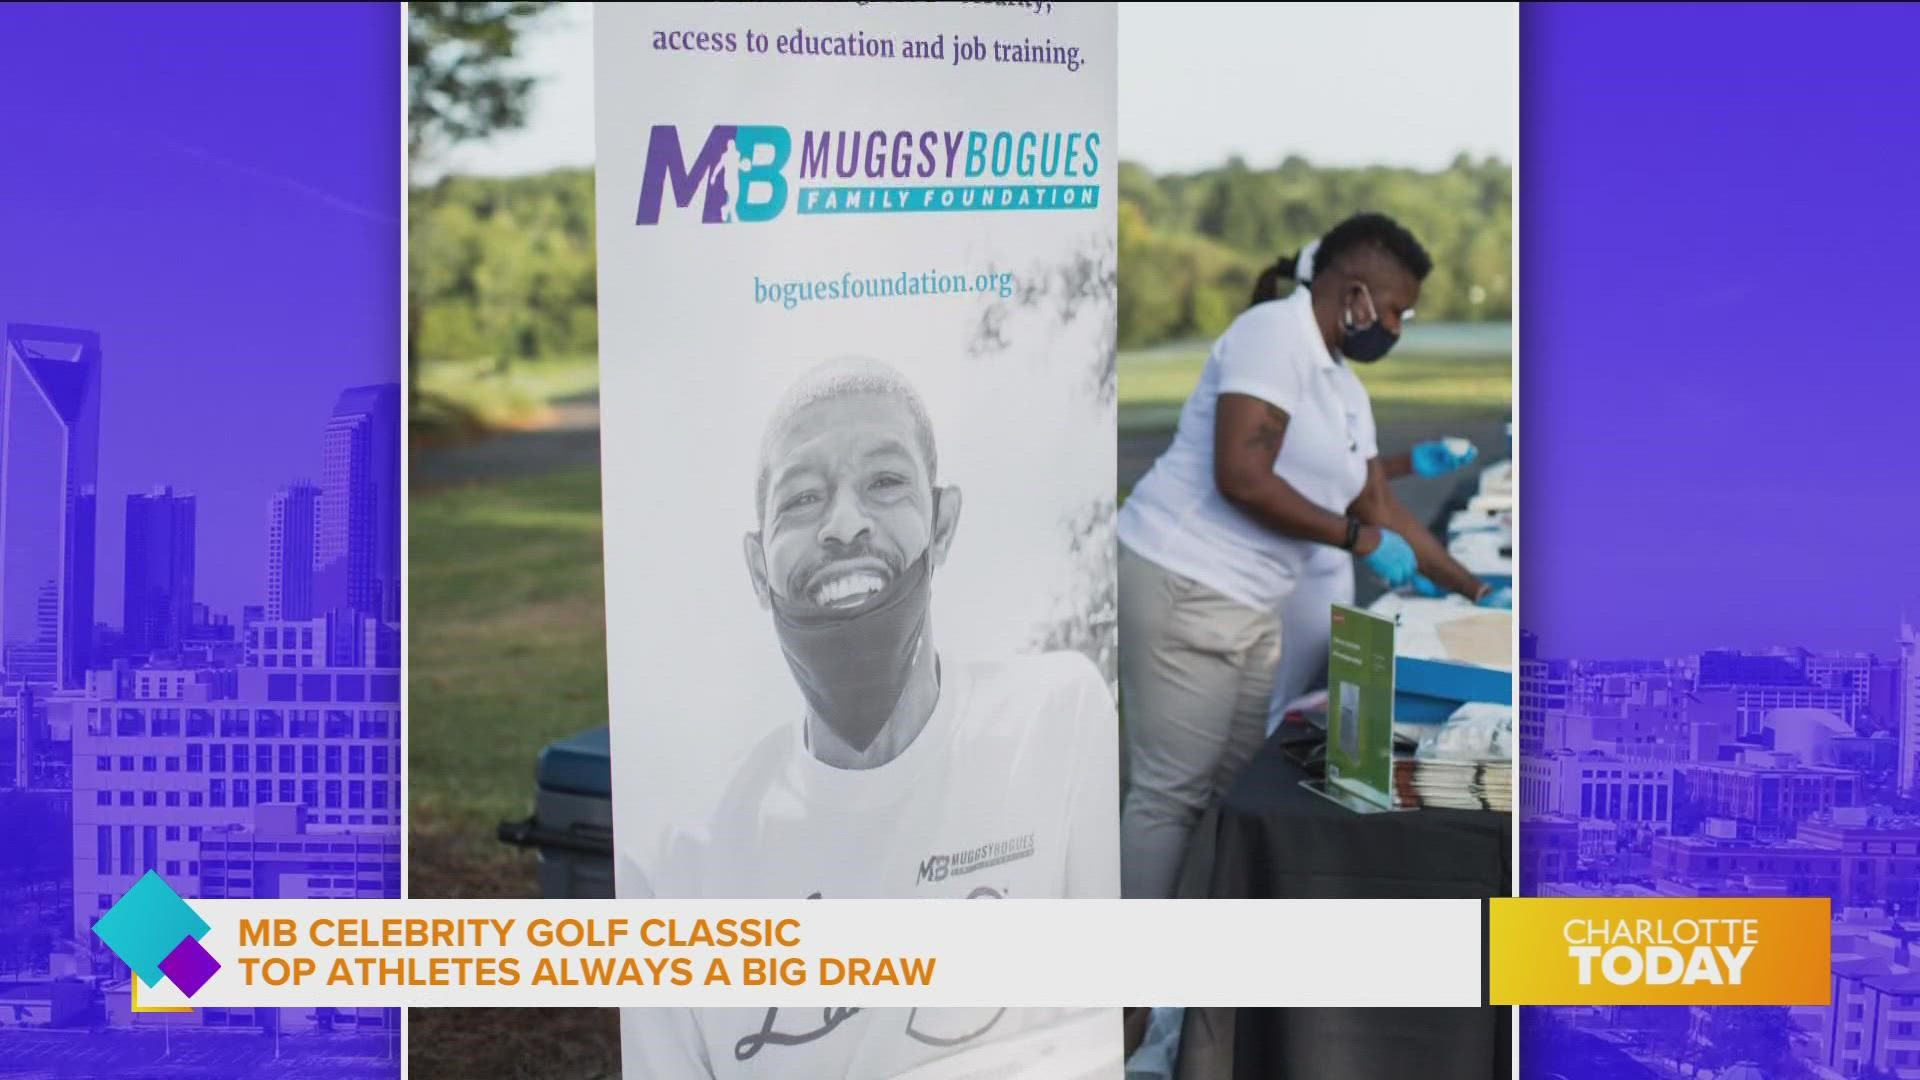 Benefits the Muggsy Bogues Family Foundation, and their scholarship programs